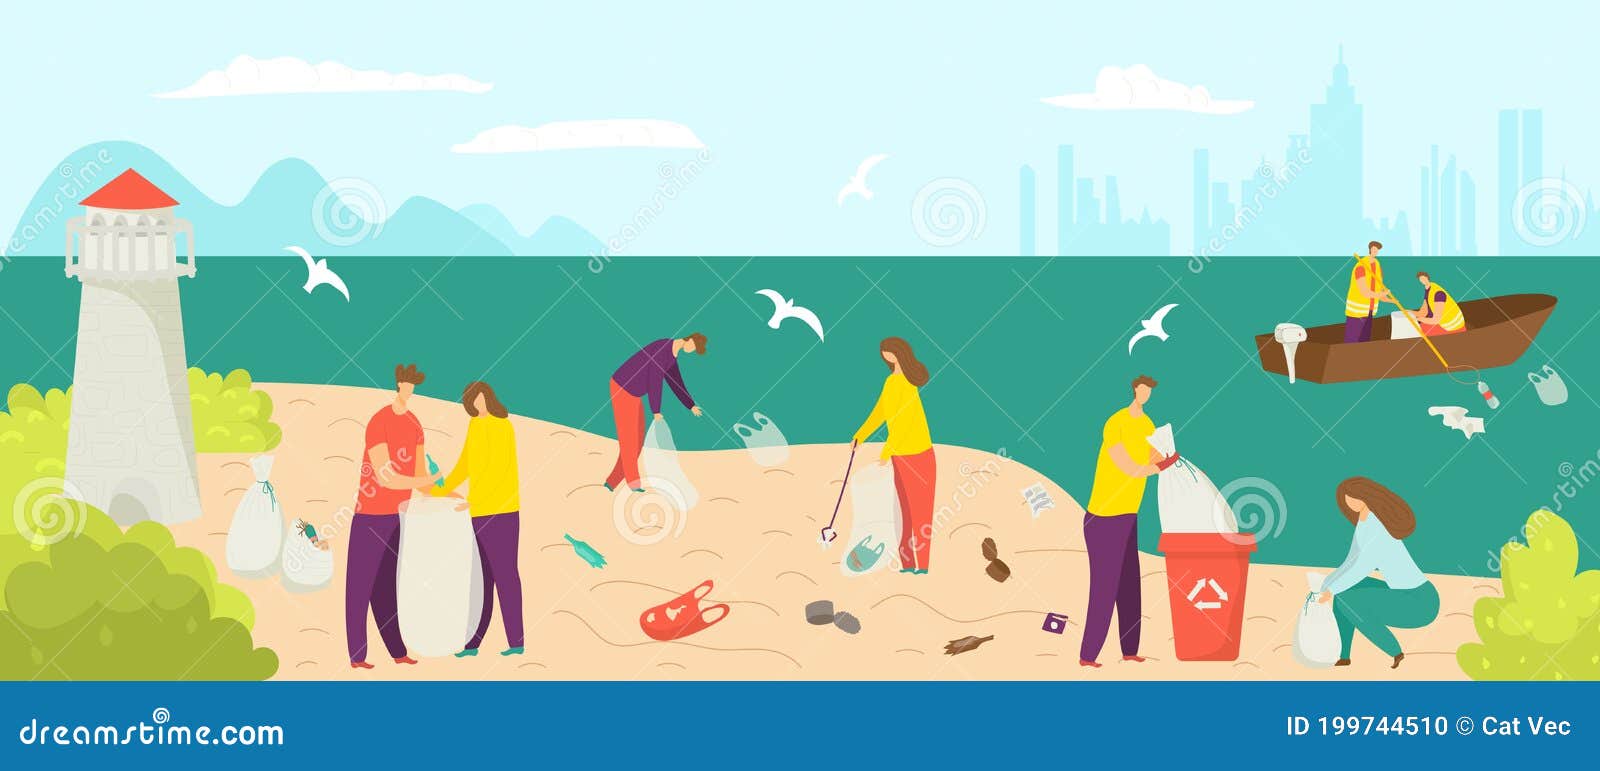 Garbage Waste at Beach, Clean Environment at Shore Vector Illustration ...